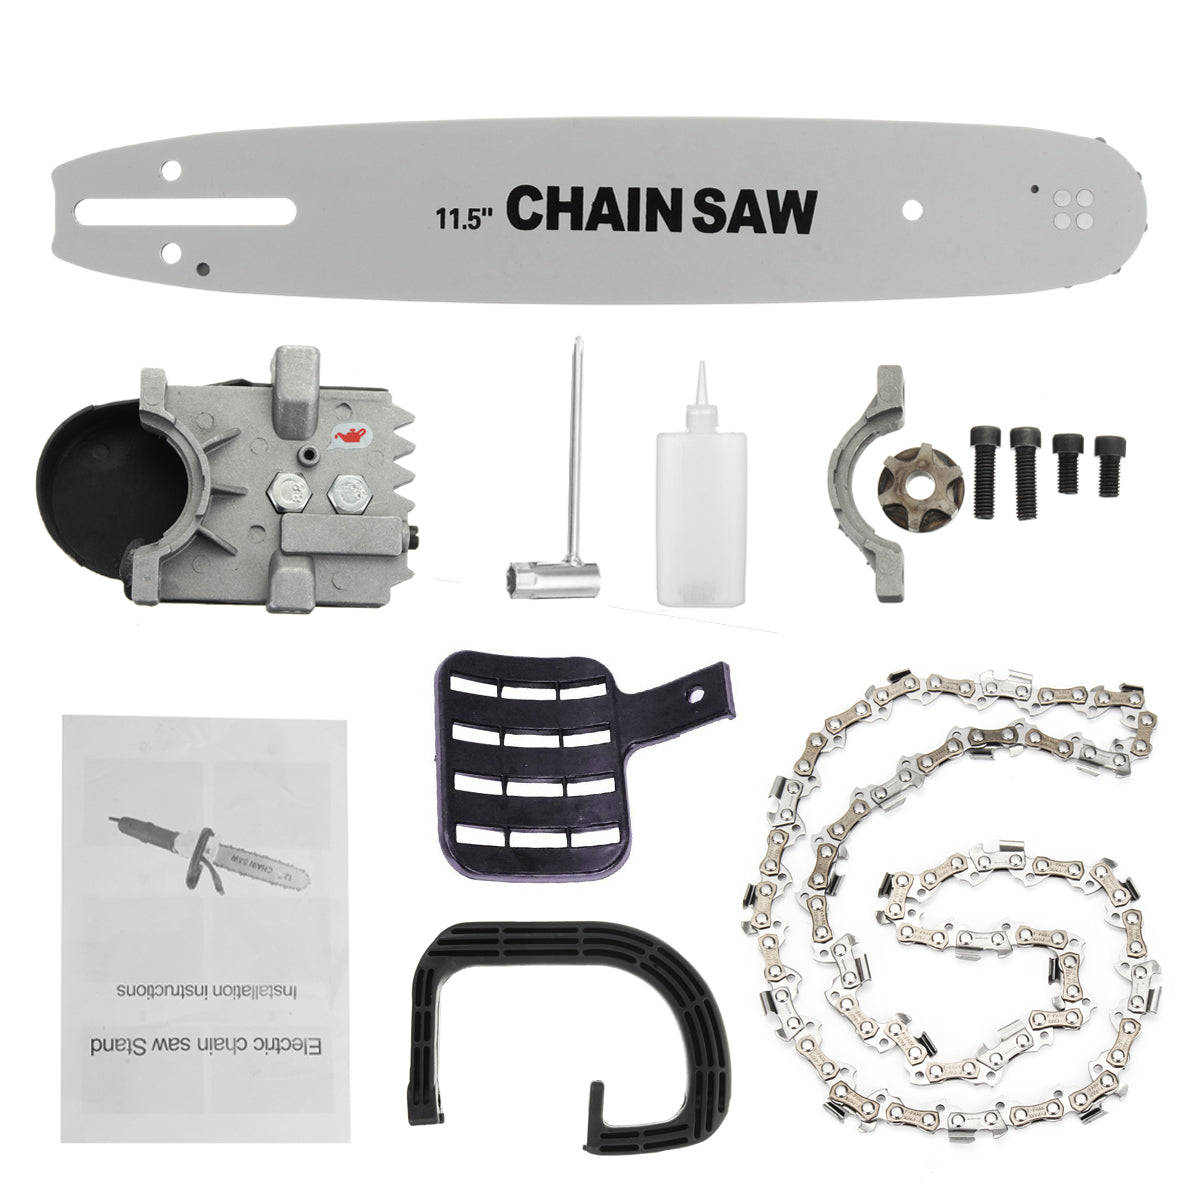 11.5 Inch Chainsaw Bracket Woodworking Tool Change 100 Angle Grinder Into Chain Saw